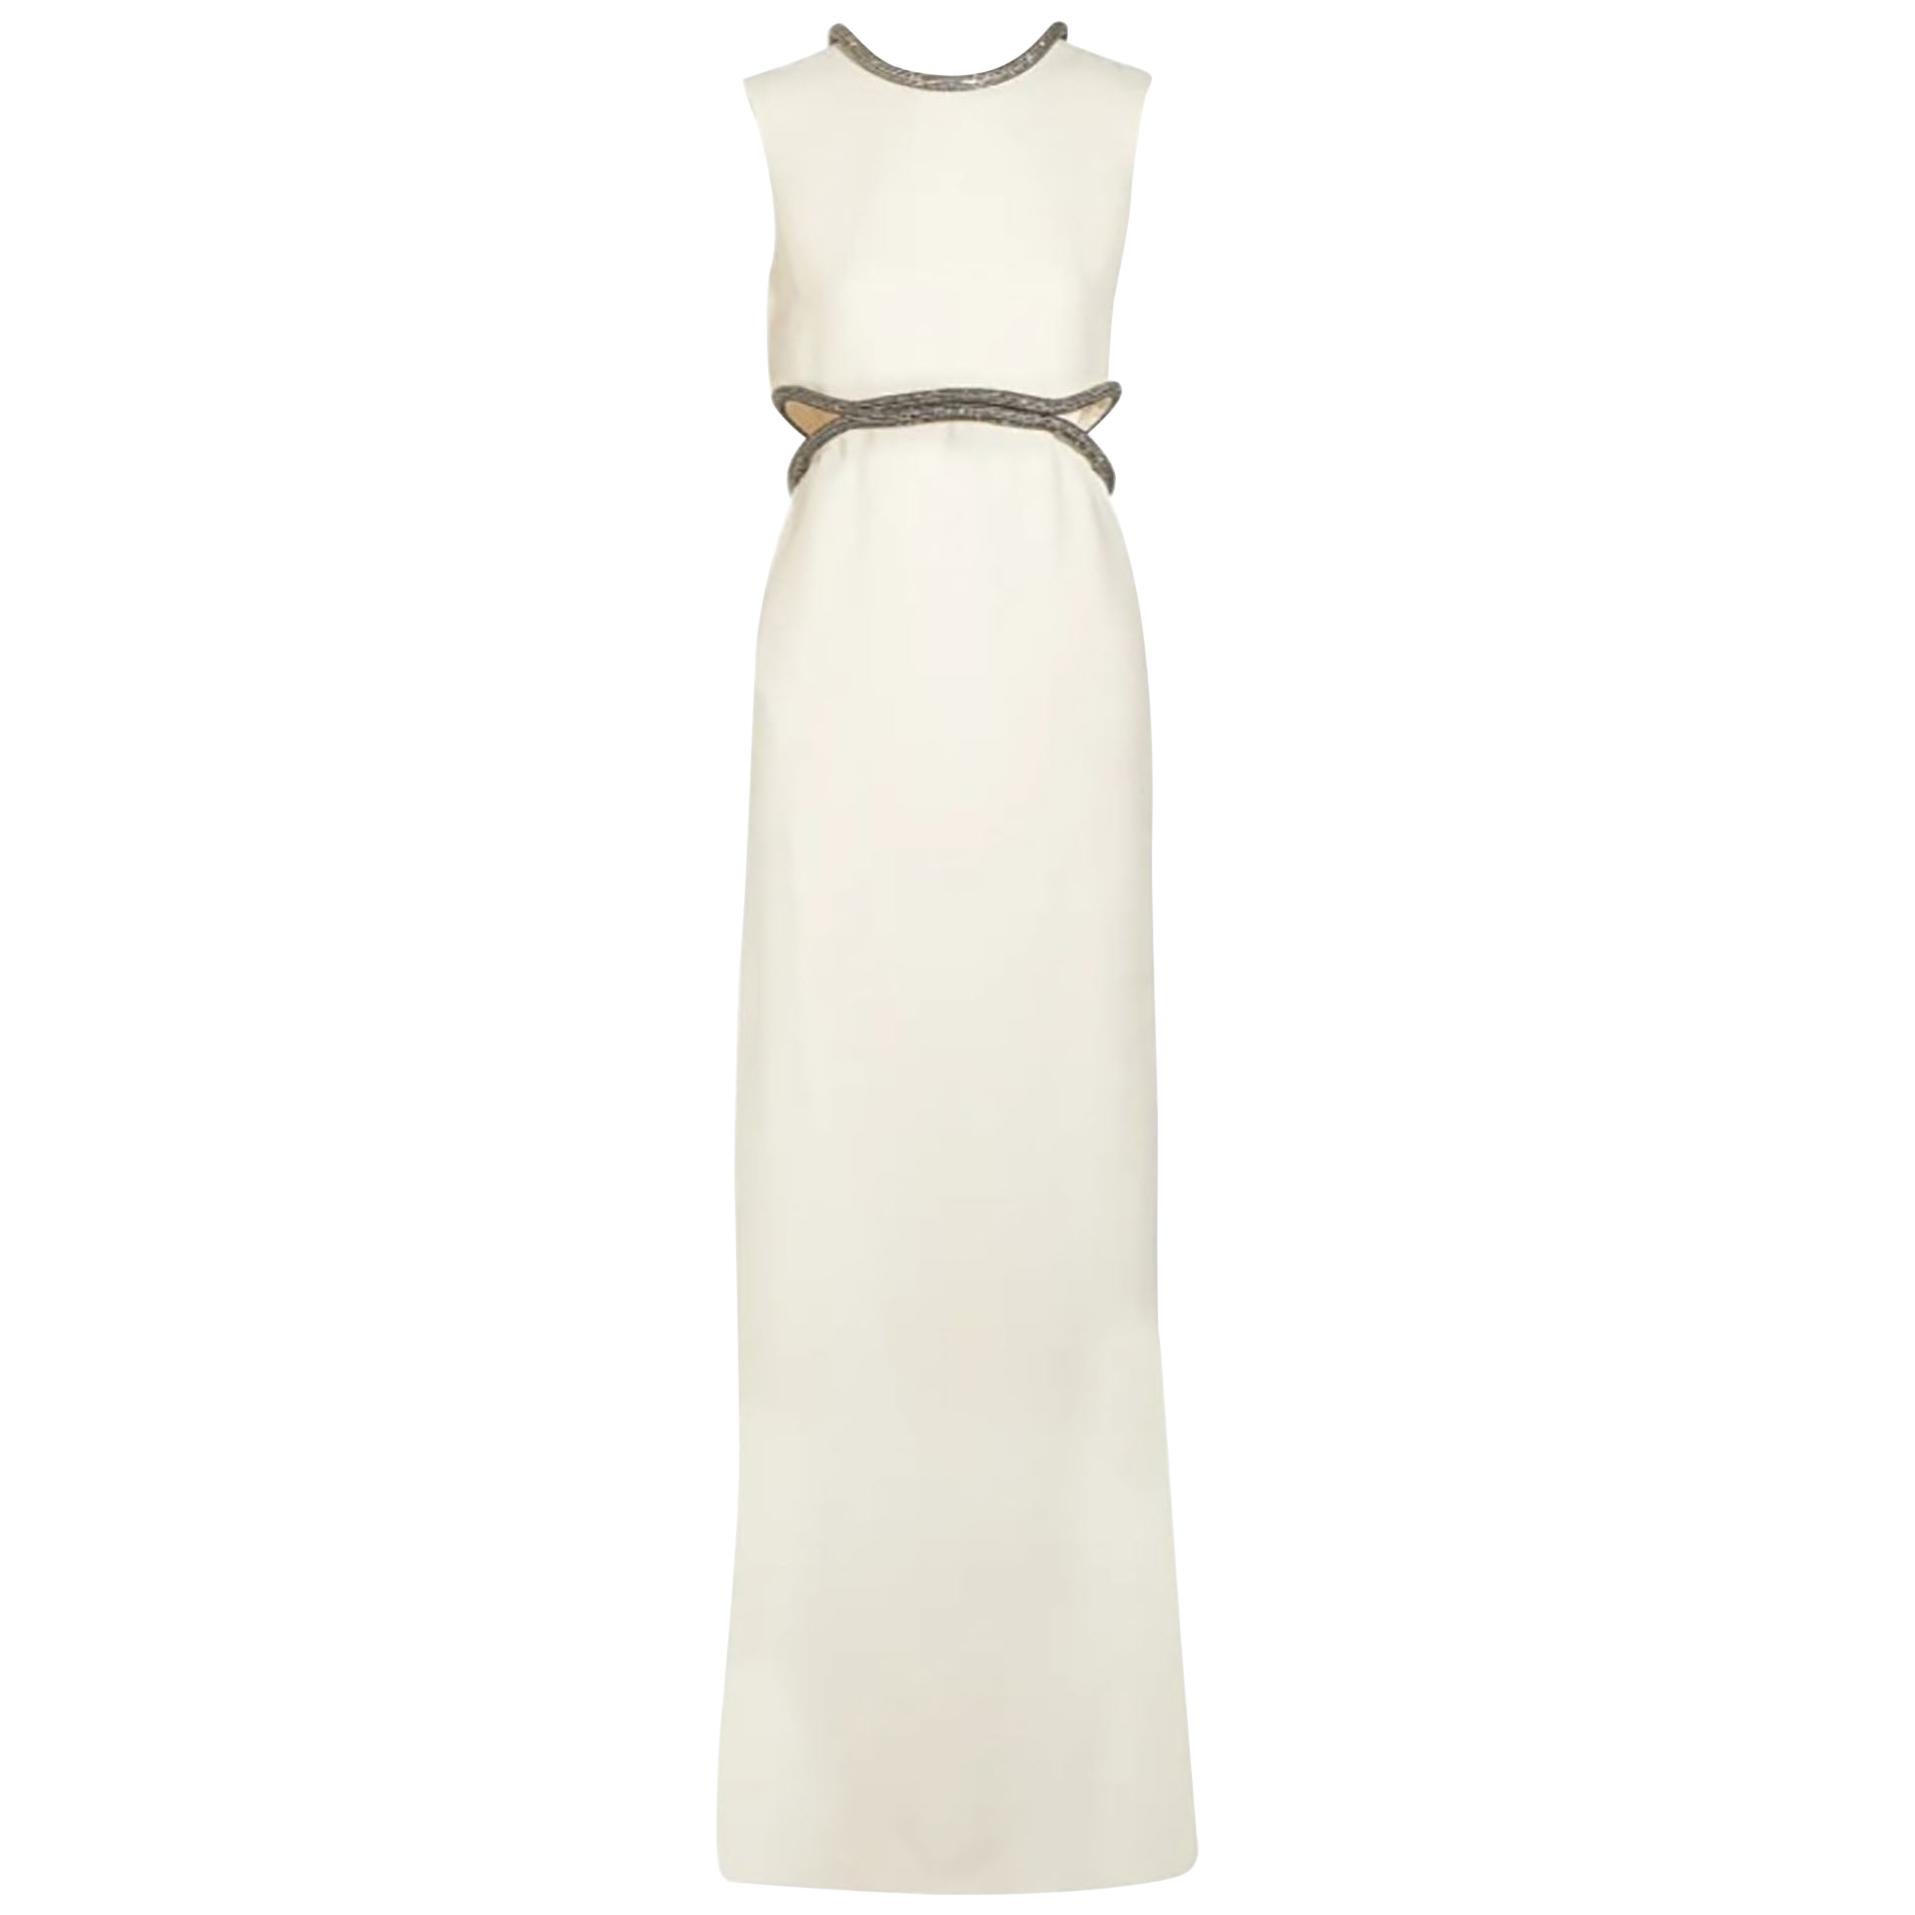 GUCCI CRYSTAL-EMBELLISHED WHITE SILK-CADY DRESS GOWN size IT 38 - US 2-4